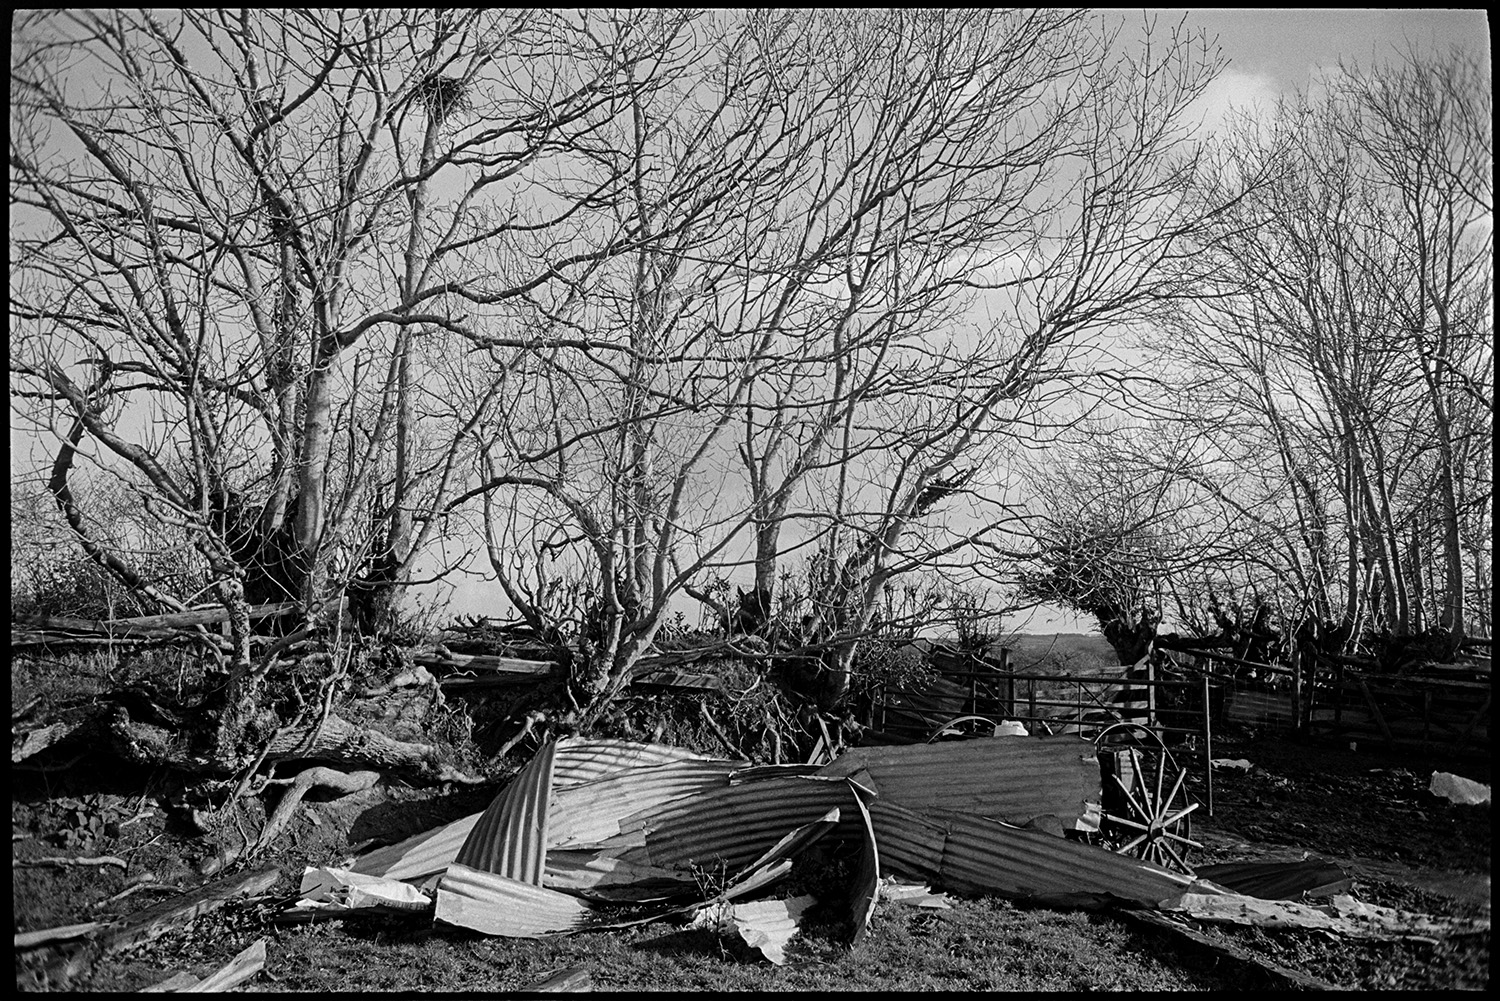 Gnarled tree roots in hedge, overgrown, old corrugated iron.
[A heap of old corrugated iron sheets, wheels and scrap metal by a field gateway at  Ashwell, Dolton. A hedgerow with Ash trees and a bird's nest, is visible in the background.]